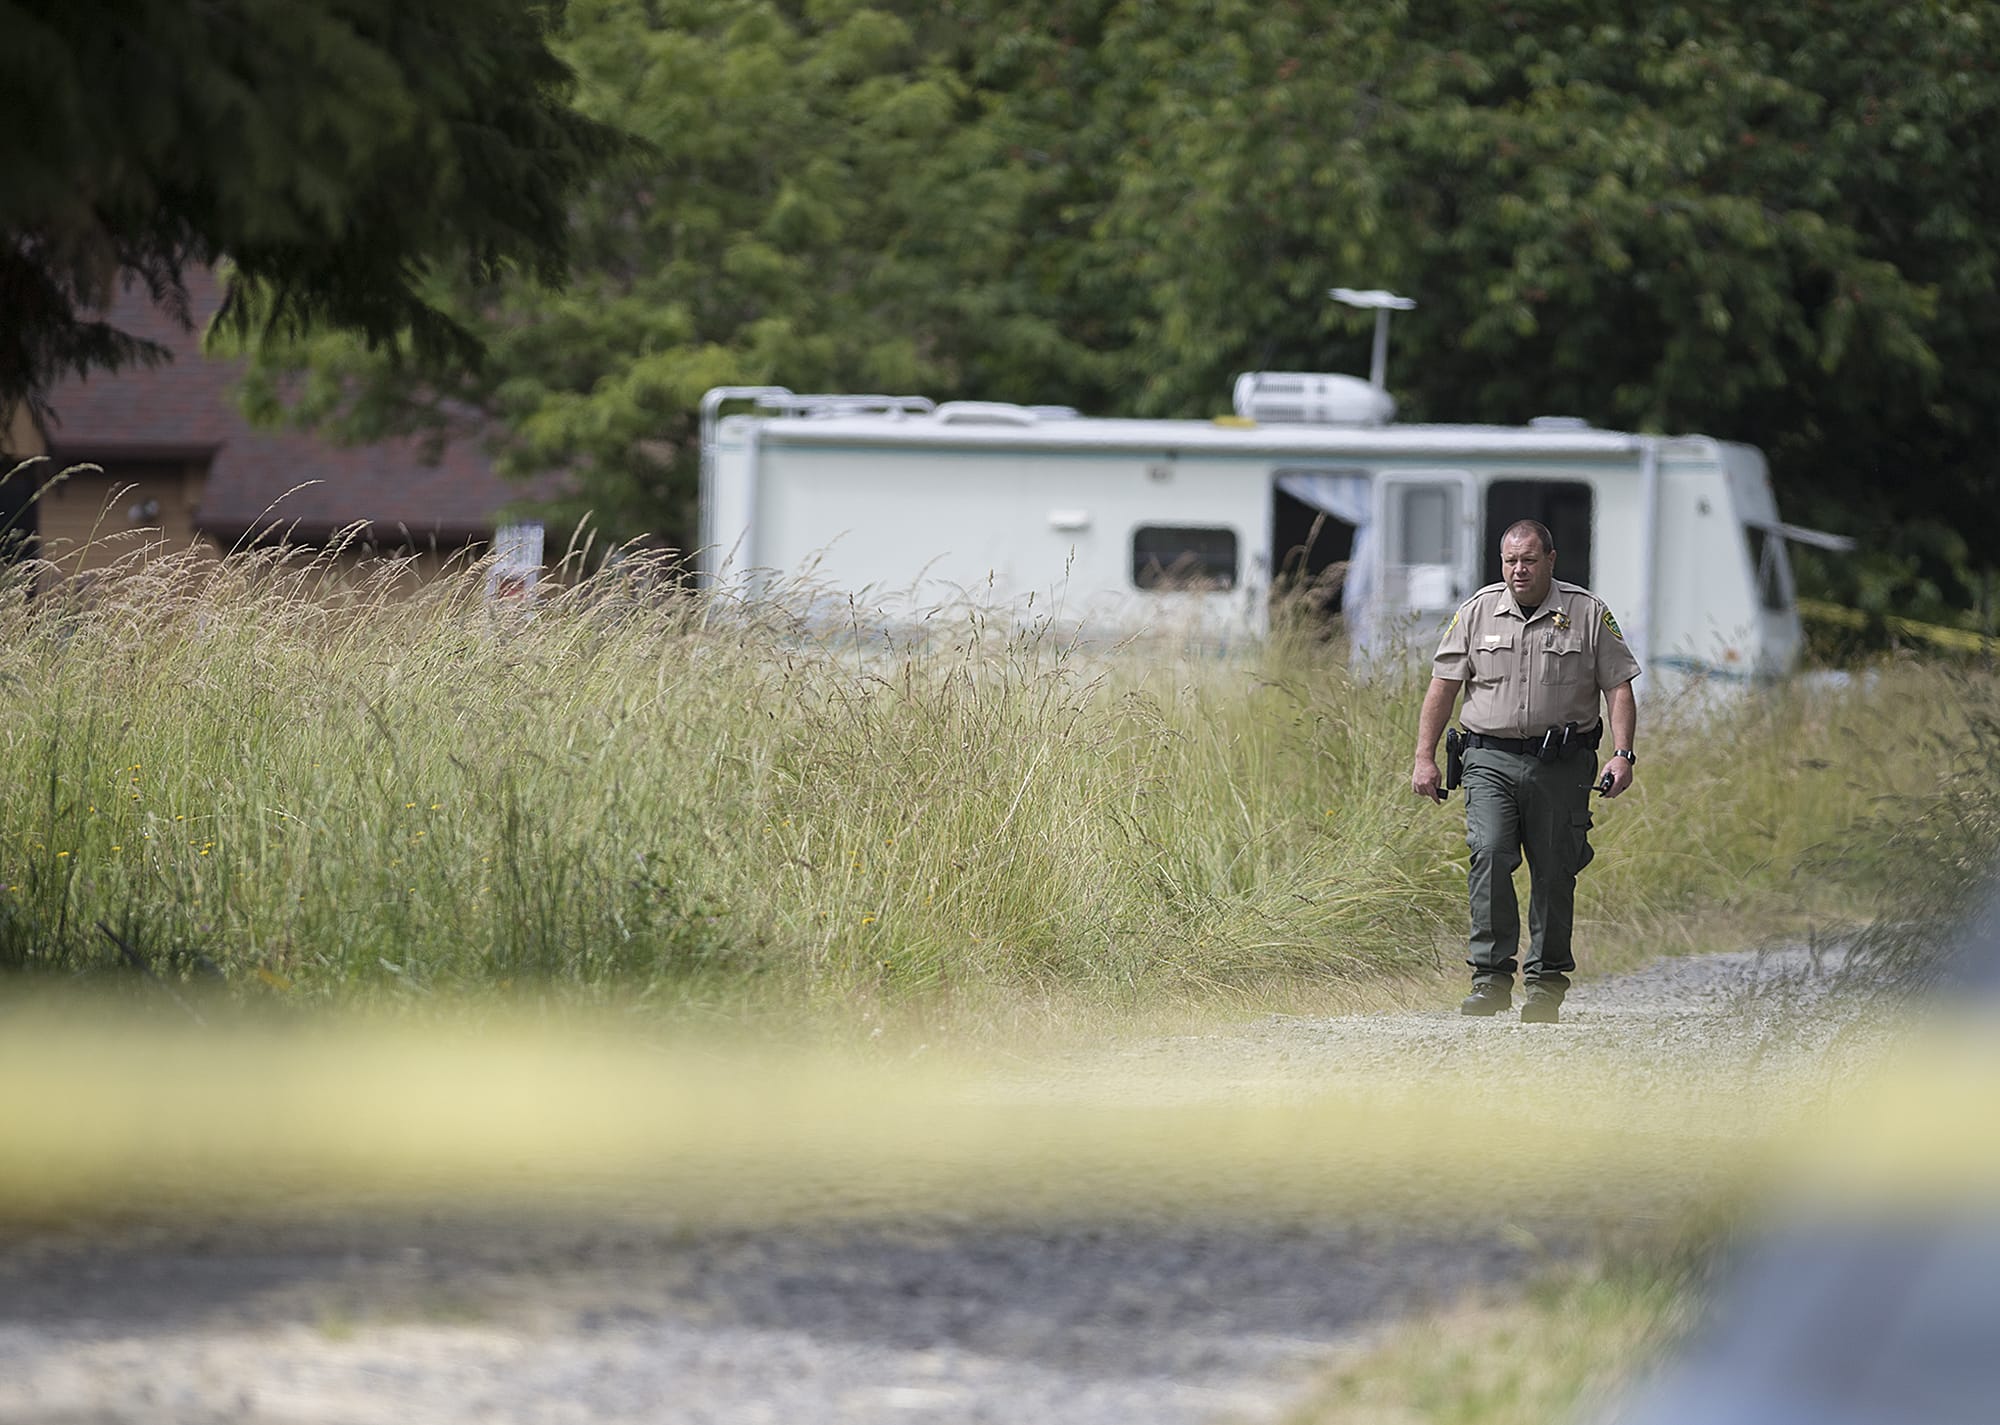 Comm. Duncan Hoss of the Clark County Sheriff's Office walks along the driveway at the scene of an officer-involved shooting in Brush Prairie on Wednesday afternoon, June 13, 2018.